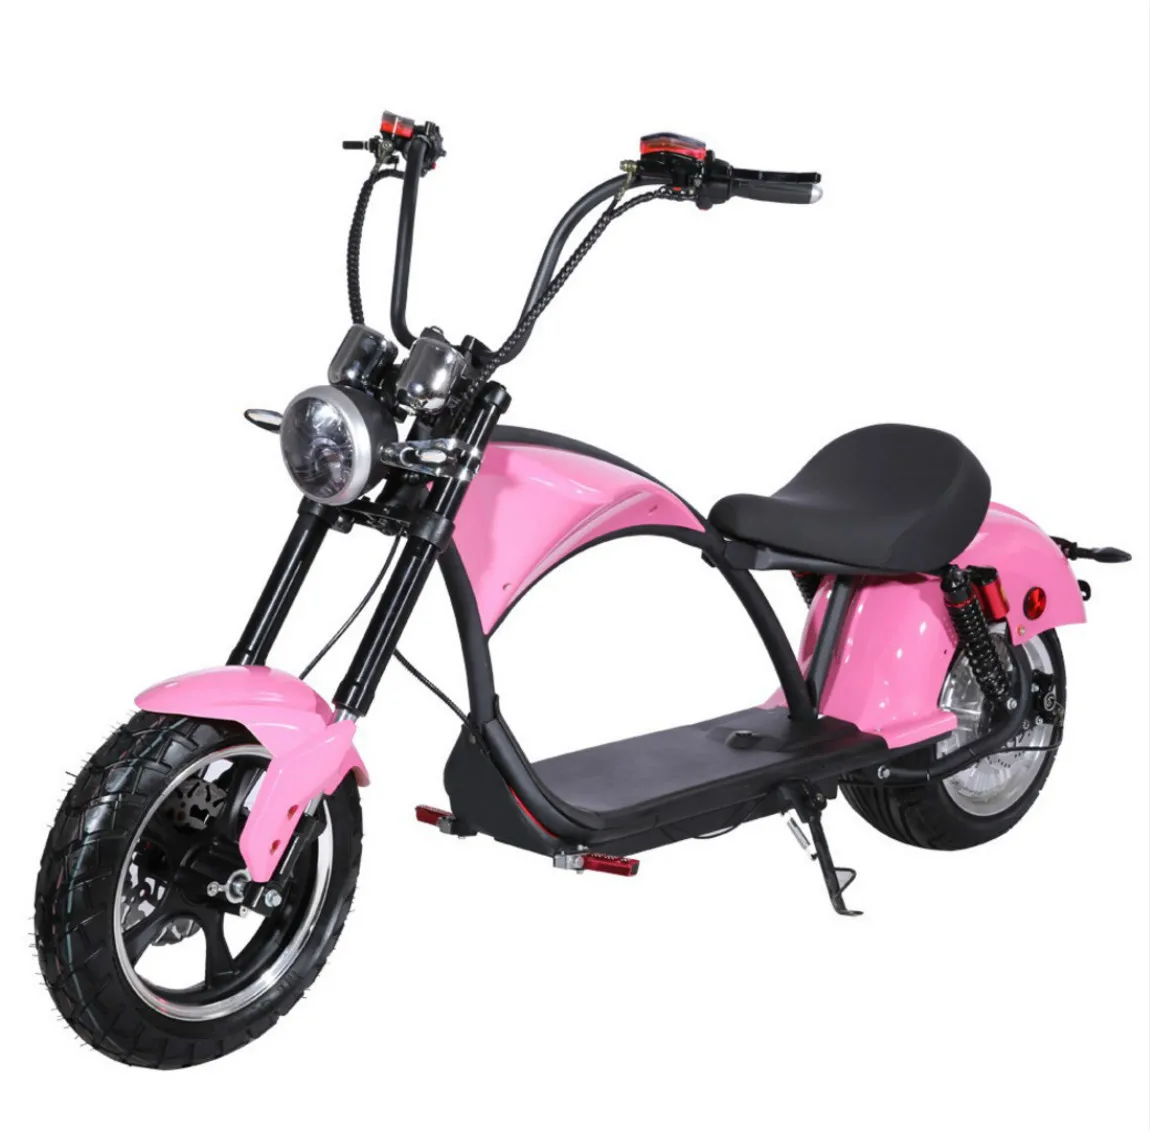 

Emark EEC COC European warehouse sur patinetes/scooters electr de chin citycoco scooter parts